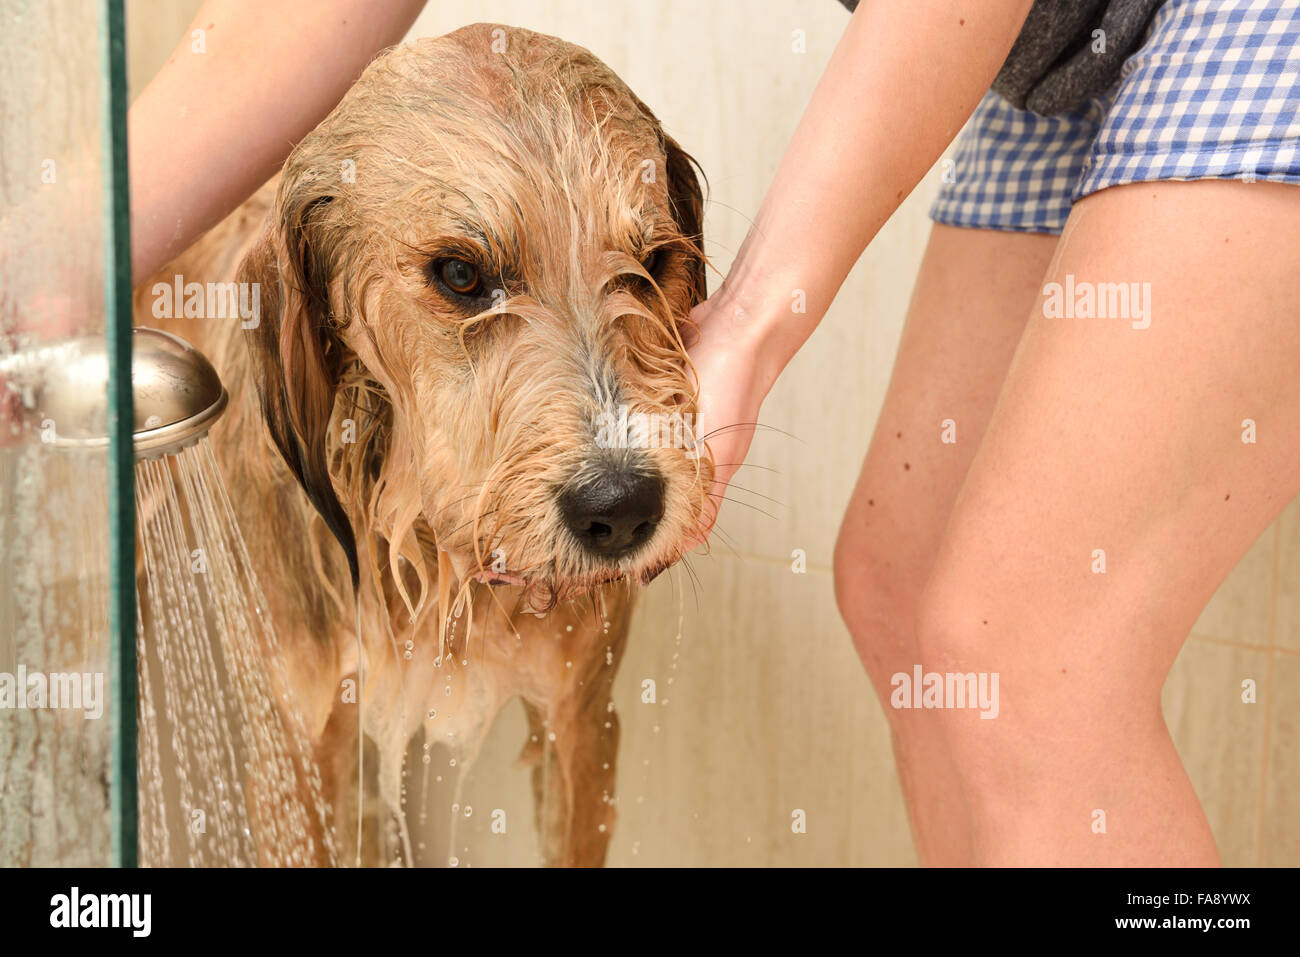 Young woman rinsing shampoo from a shaggy dog in a home shower stall Stock Photo